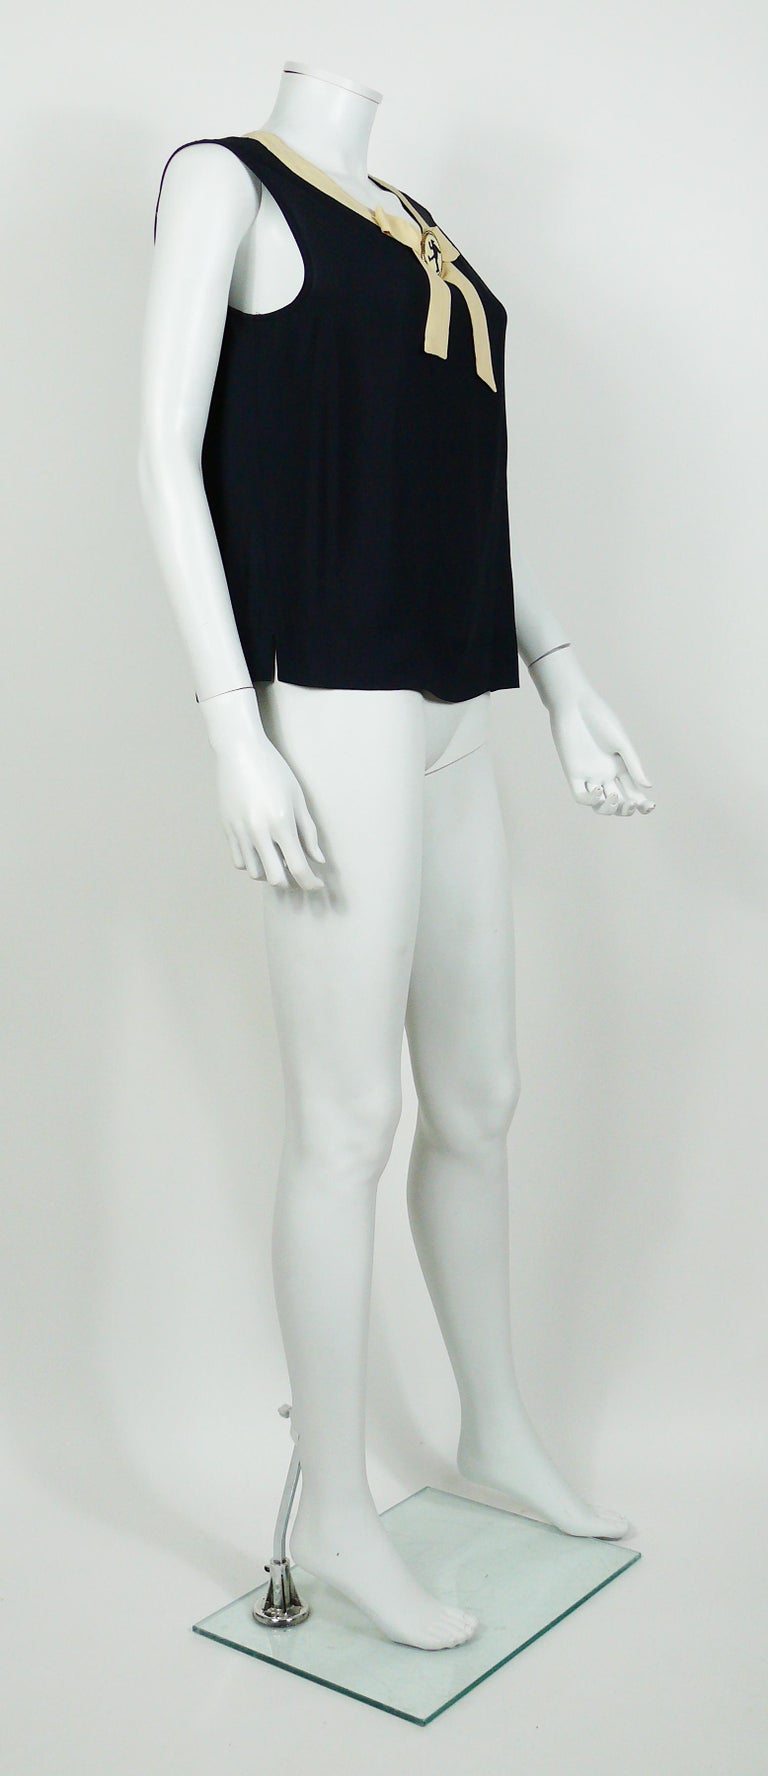 MOSCHINO navy blue sleeveless top featuring a black/white large cameo.

Label reads CHEAP AND CHIC by MOSCHINO
Made in Italy.

Size tag reads : I 48 / D 42 / F 42 / GB 14 / USA 12.
Please refer to masurements.

Composition tag reads : 75% Rayon /